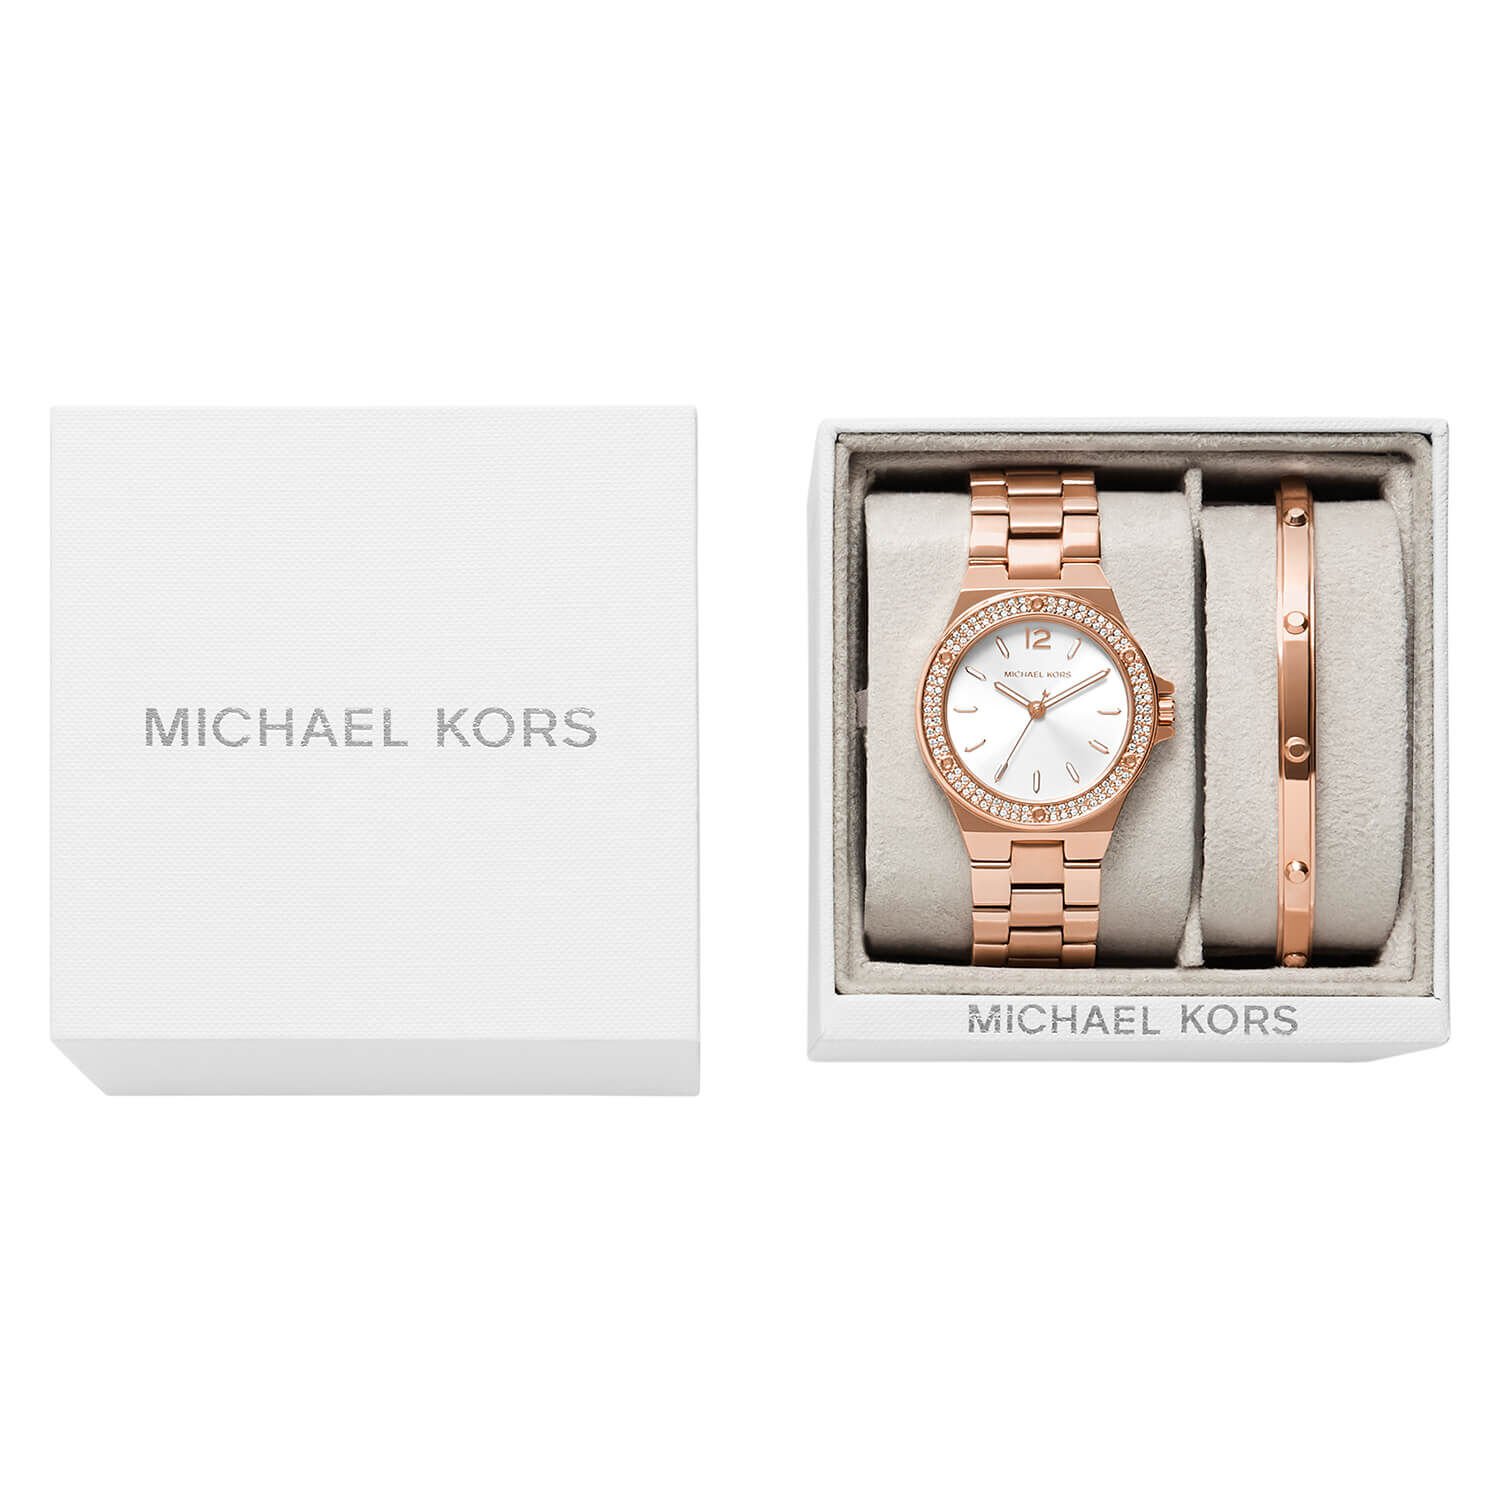 Michael Kors Rose Gold Watch with White face and extra strap parts  Vinted